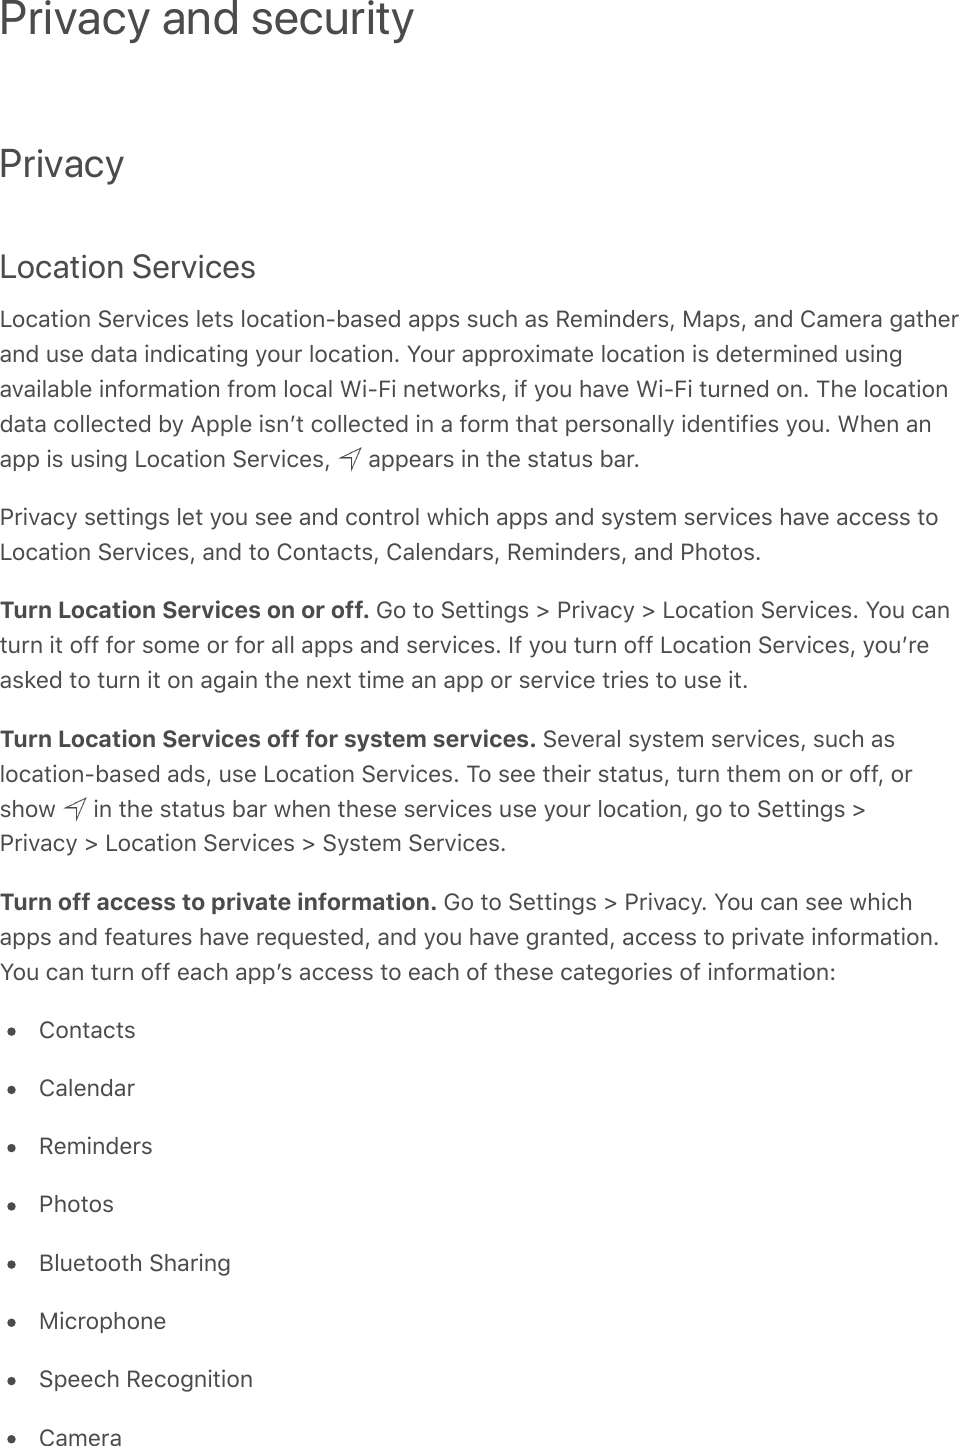 PrivacyLocation ServicesLocation Services lets location-based apps such as Reminders, Maps, and Camera gatherand use data indicating your location. Your approximate location is determined usingavailable information from local Wi-Fi networks, if you have Wi-Fi turned on. The locationdata collected by Apple isnʼt collected in a form that personally identifies you. When anapp is using Location Services,   appears in the status bar.Privacy settings let you see and control which apps and system services have access toLocation Services, and to Contacts, Calendars, Reminders, and Photos.Turn Location Services on or off. Go to Settings &gt; Privacy &gt; Location Services. You canturn it off for some or for all apps and services. If you turn off Location Services, youʼreasked to turn it on again the next time an app or service tries to use it.Turn Location Services off for system services. Several system services, such aslocation-based ads, use Location Services. To see their status, turn them on or off, orshow   in the status bar when these services use your location, go to Settings &gt;Privacy &gt; Location Services &gt; System Services.Turn off access to private information. Go to Settings &gt; Privacy. You can see whichapps and features have requested, and you have granted, access to private information.You can turn off each appʼs access to each of these categories of information:ContactsCalendarRemindersPhotosBluetooth SharingMicrophoneSpeech RecognitionCameraPrivacy and security